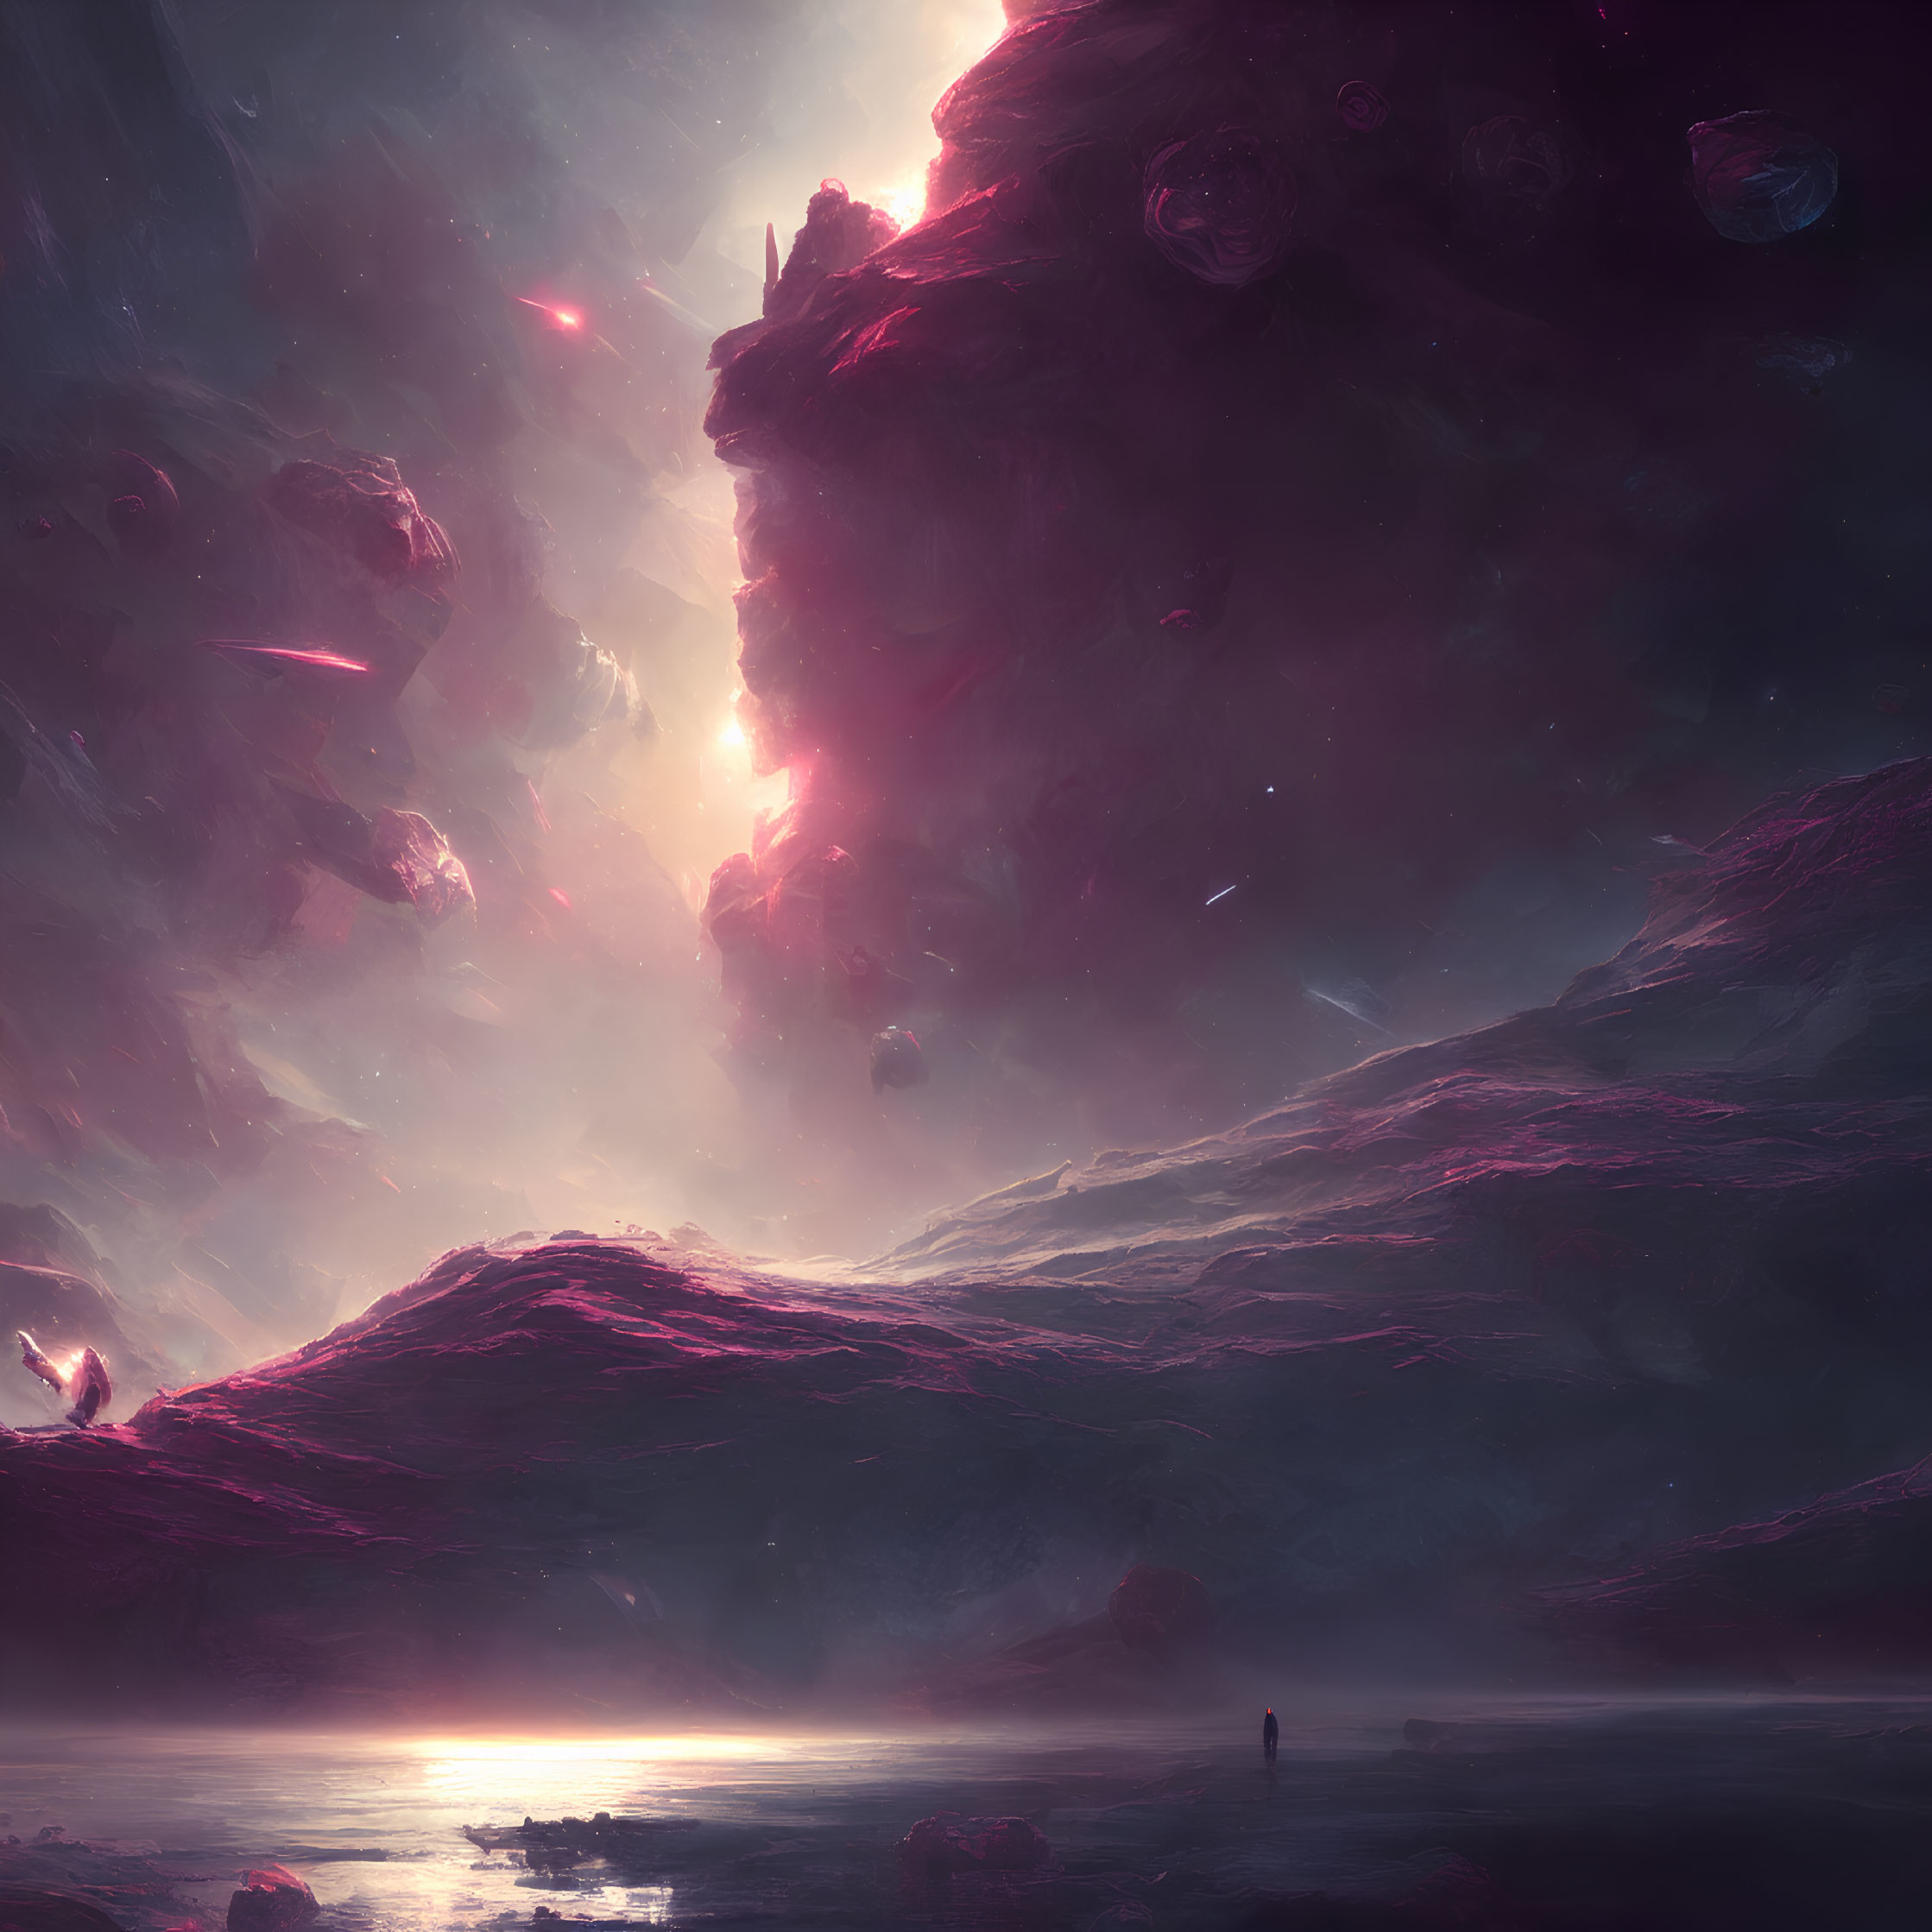 Mystical landscape with towering rock formations and glowing pink sky